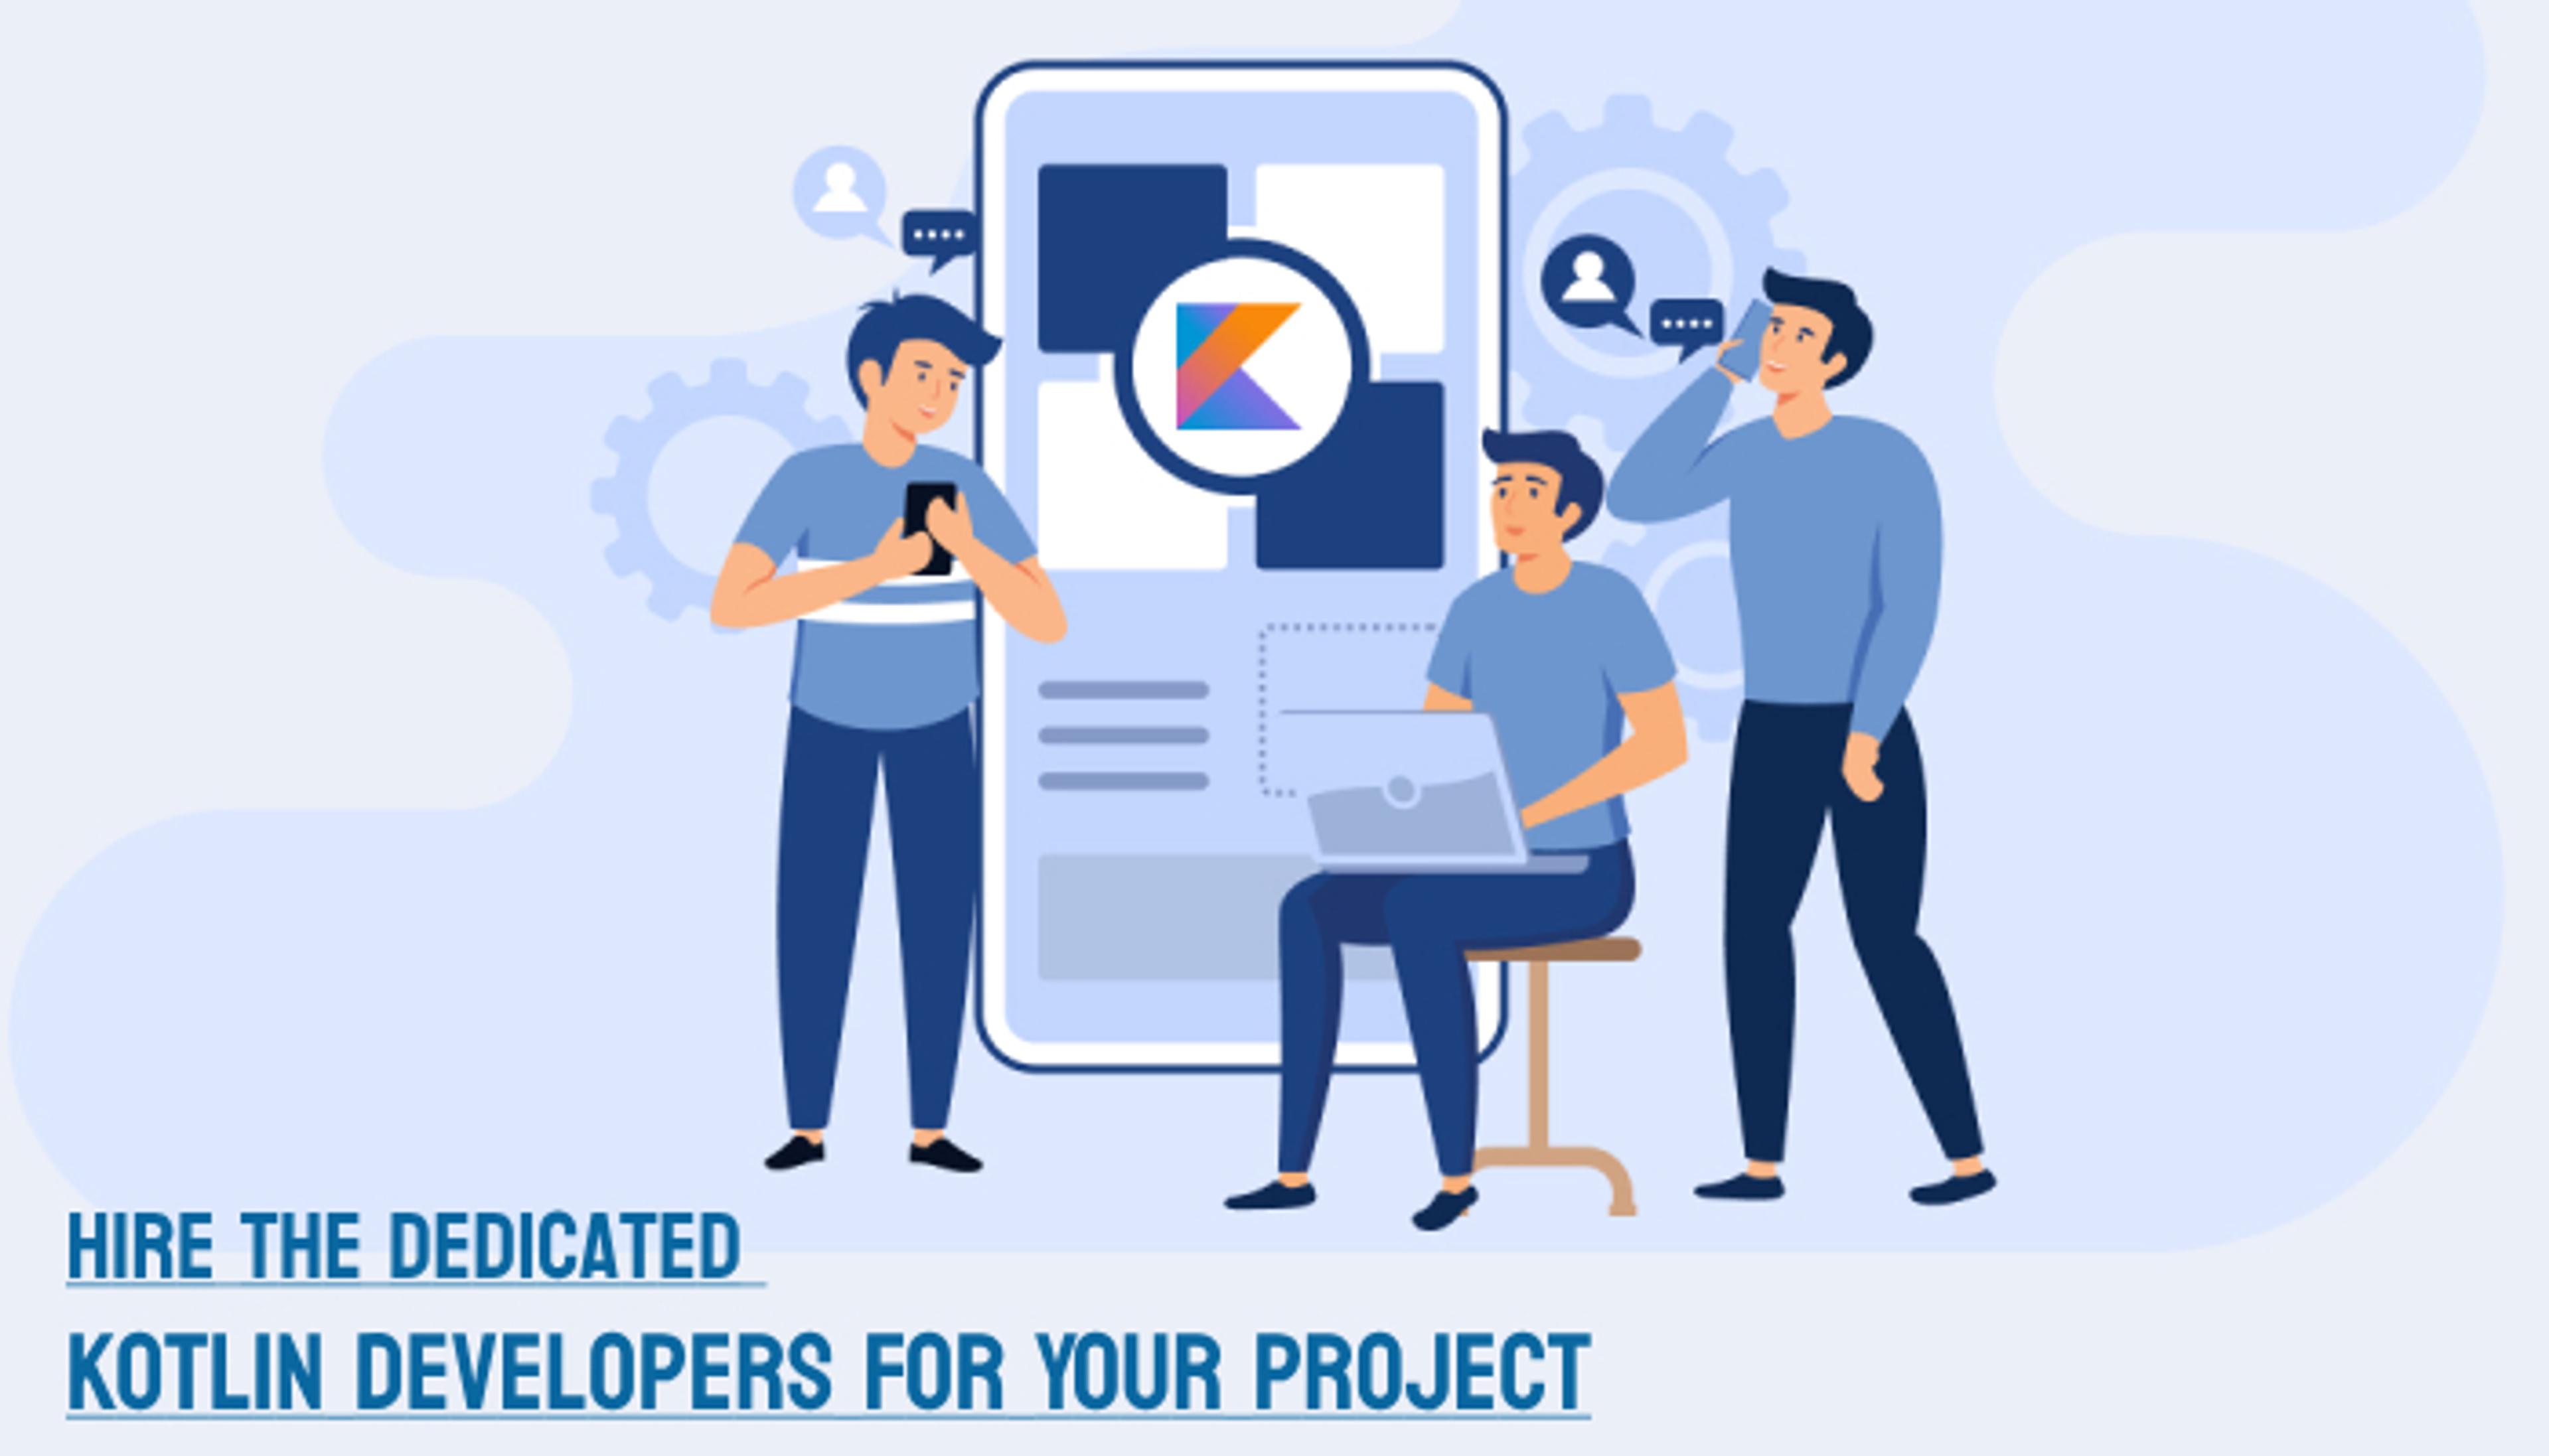 Tips For Hiring The Best Dedicated Kotlin Developers For Your Project